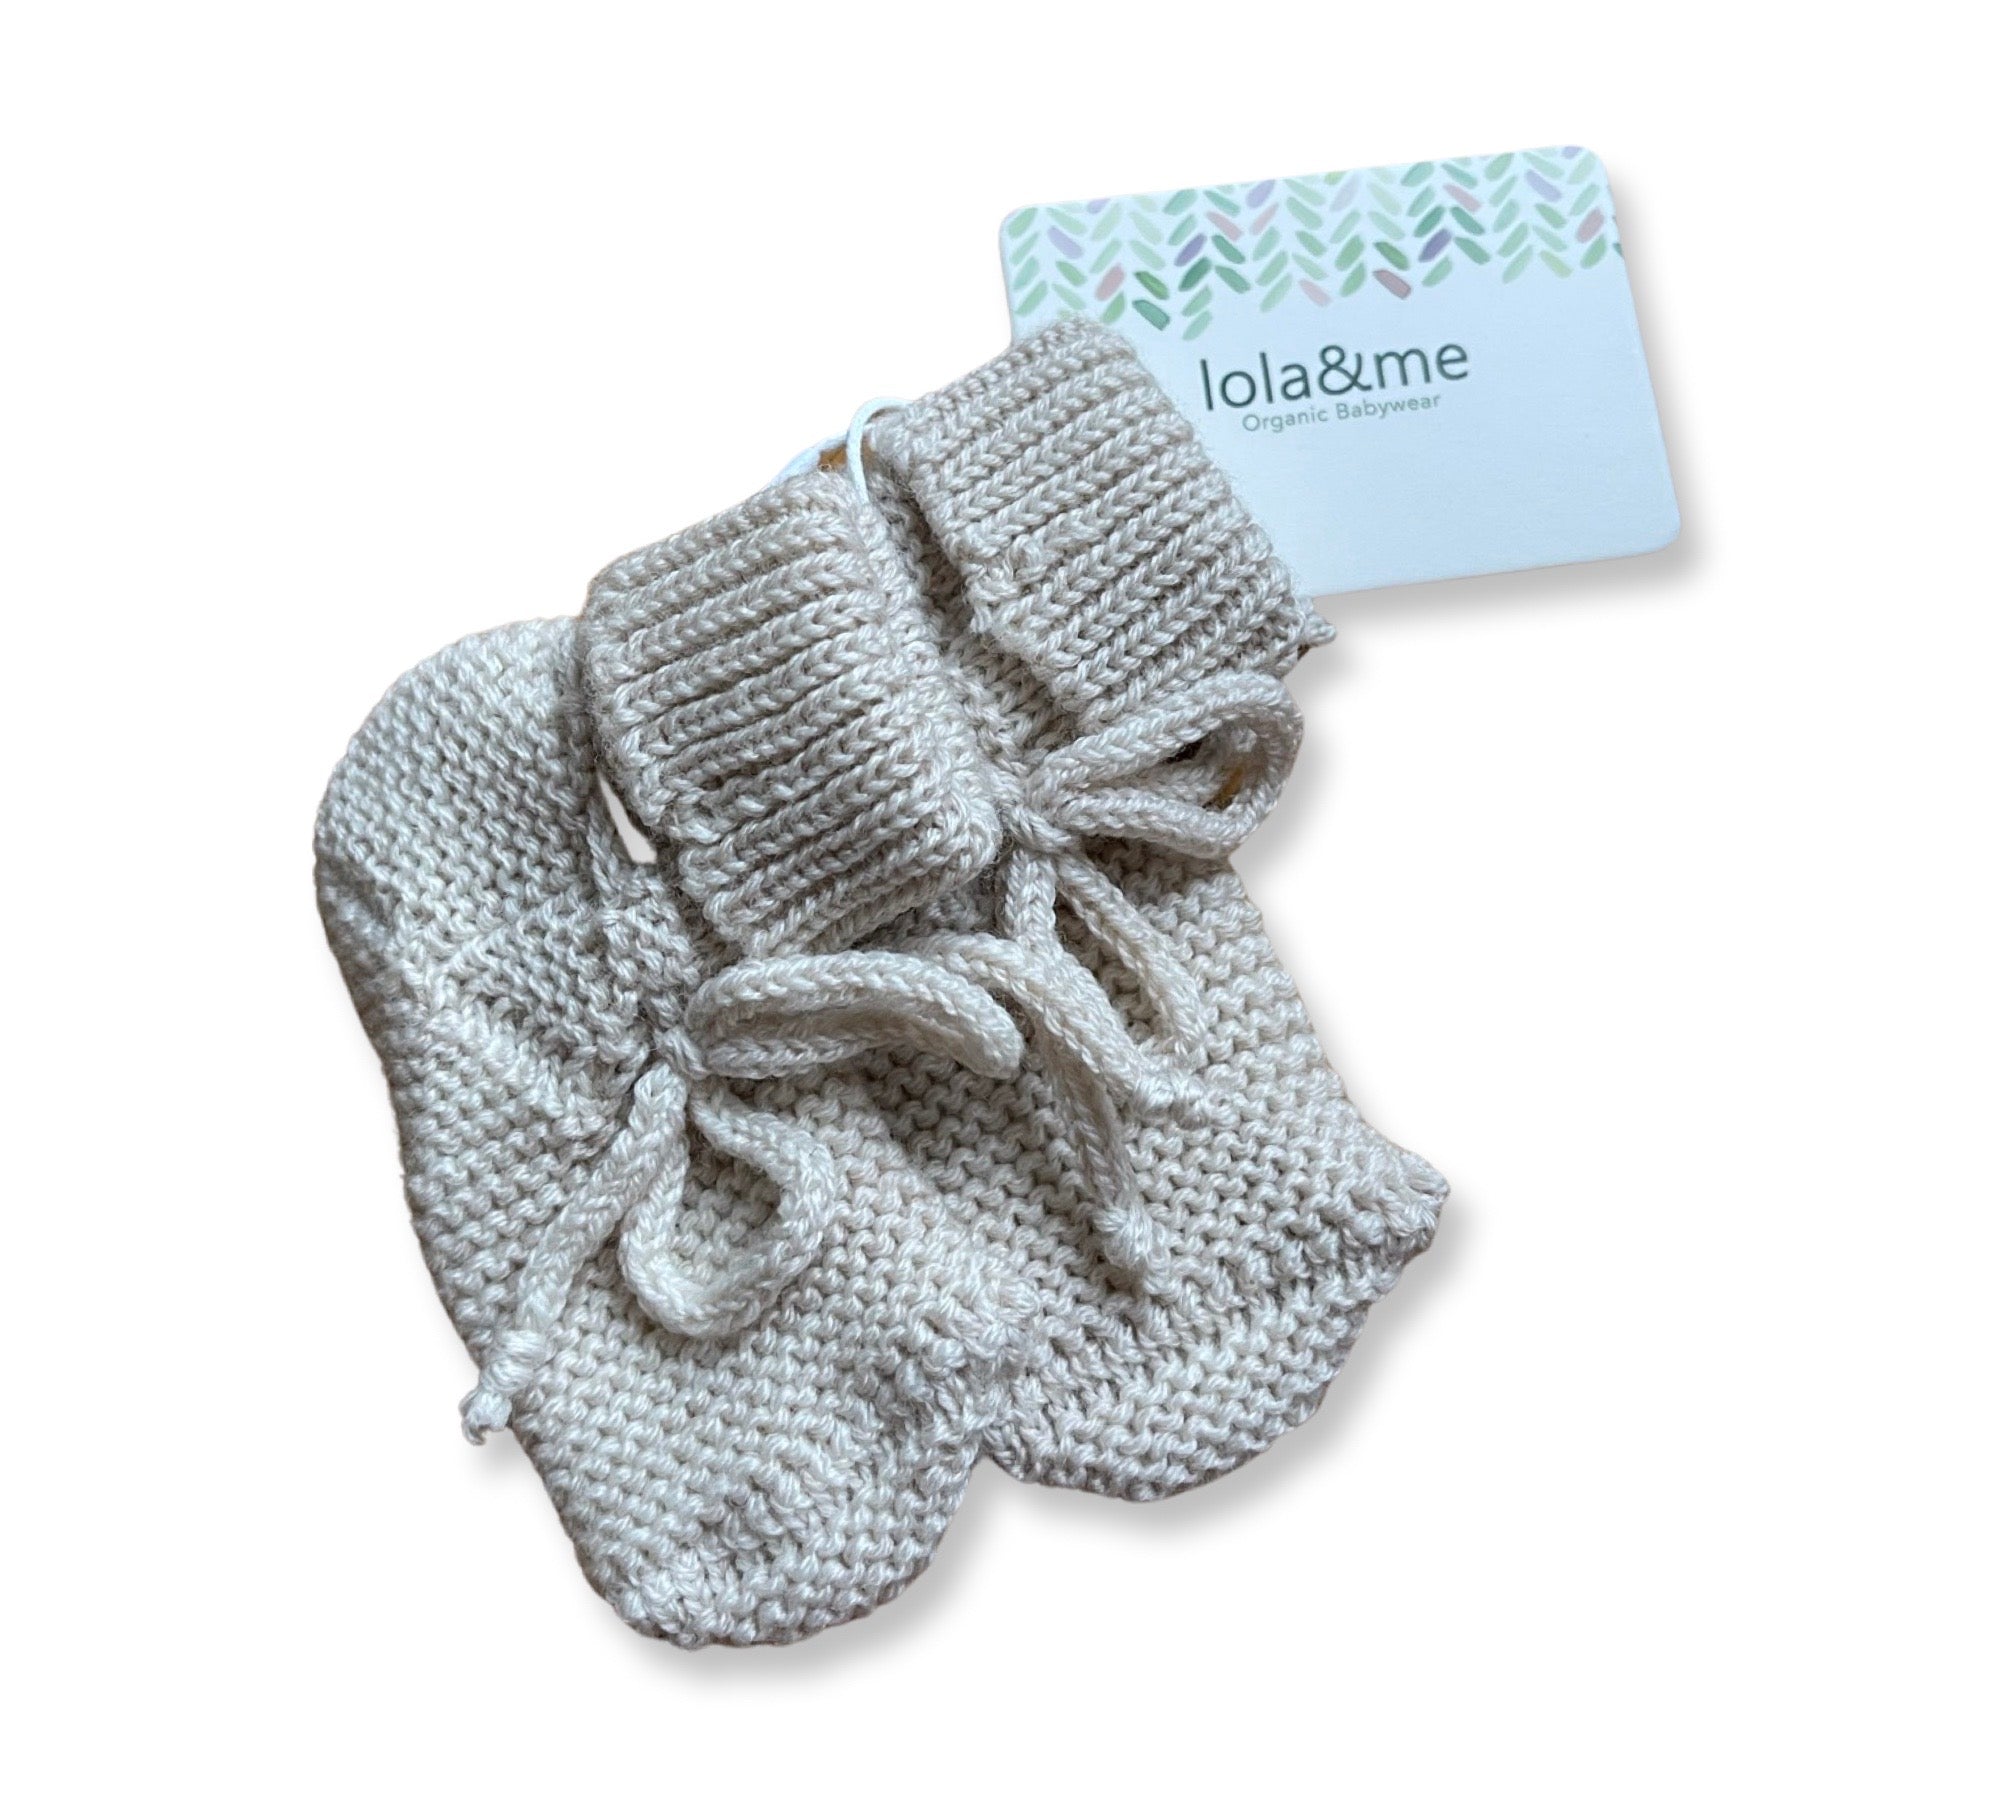 A pair of cozy, merino knit New Arrival baby booties in a neutral color, complete with adorable ribbon ties, displayed next to a brand card that says "giftbox co. organic babywear".